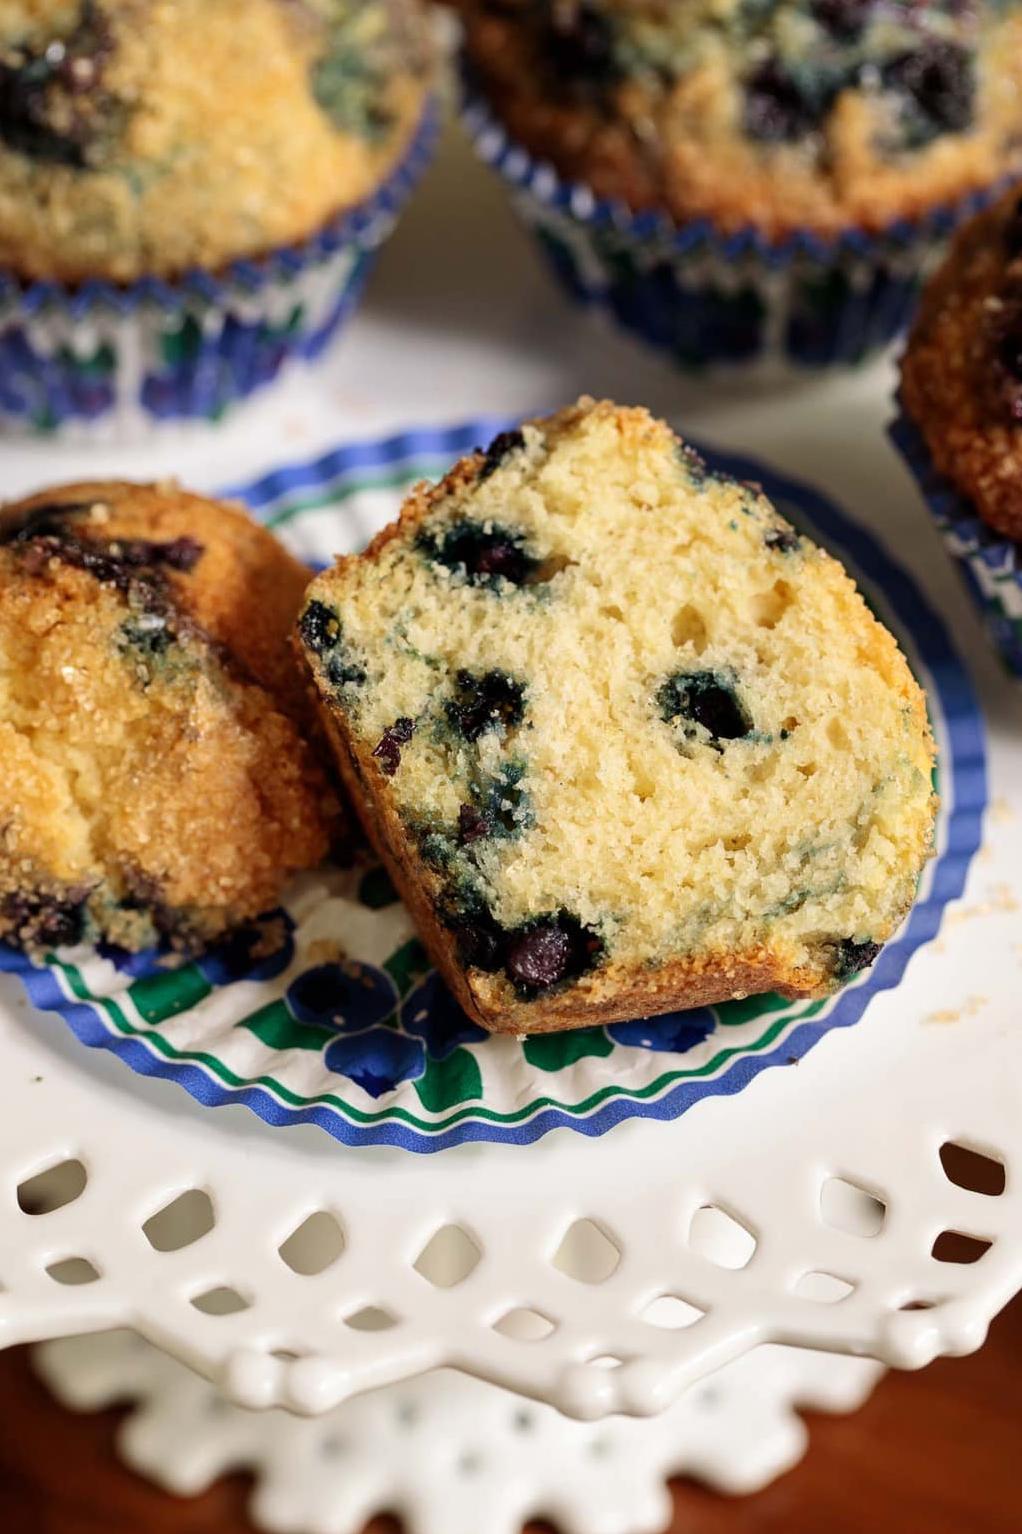  These muffins are the perfect breakfast treat to enjoy with a warm cup of coffee or tea.